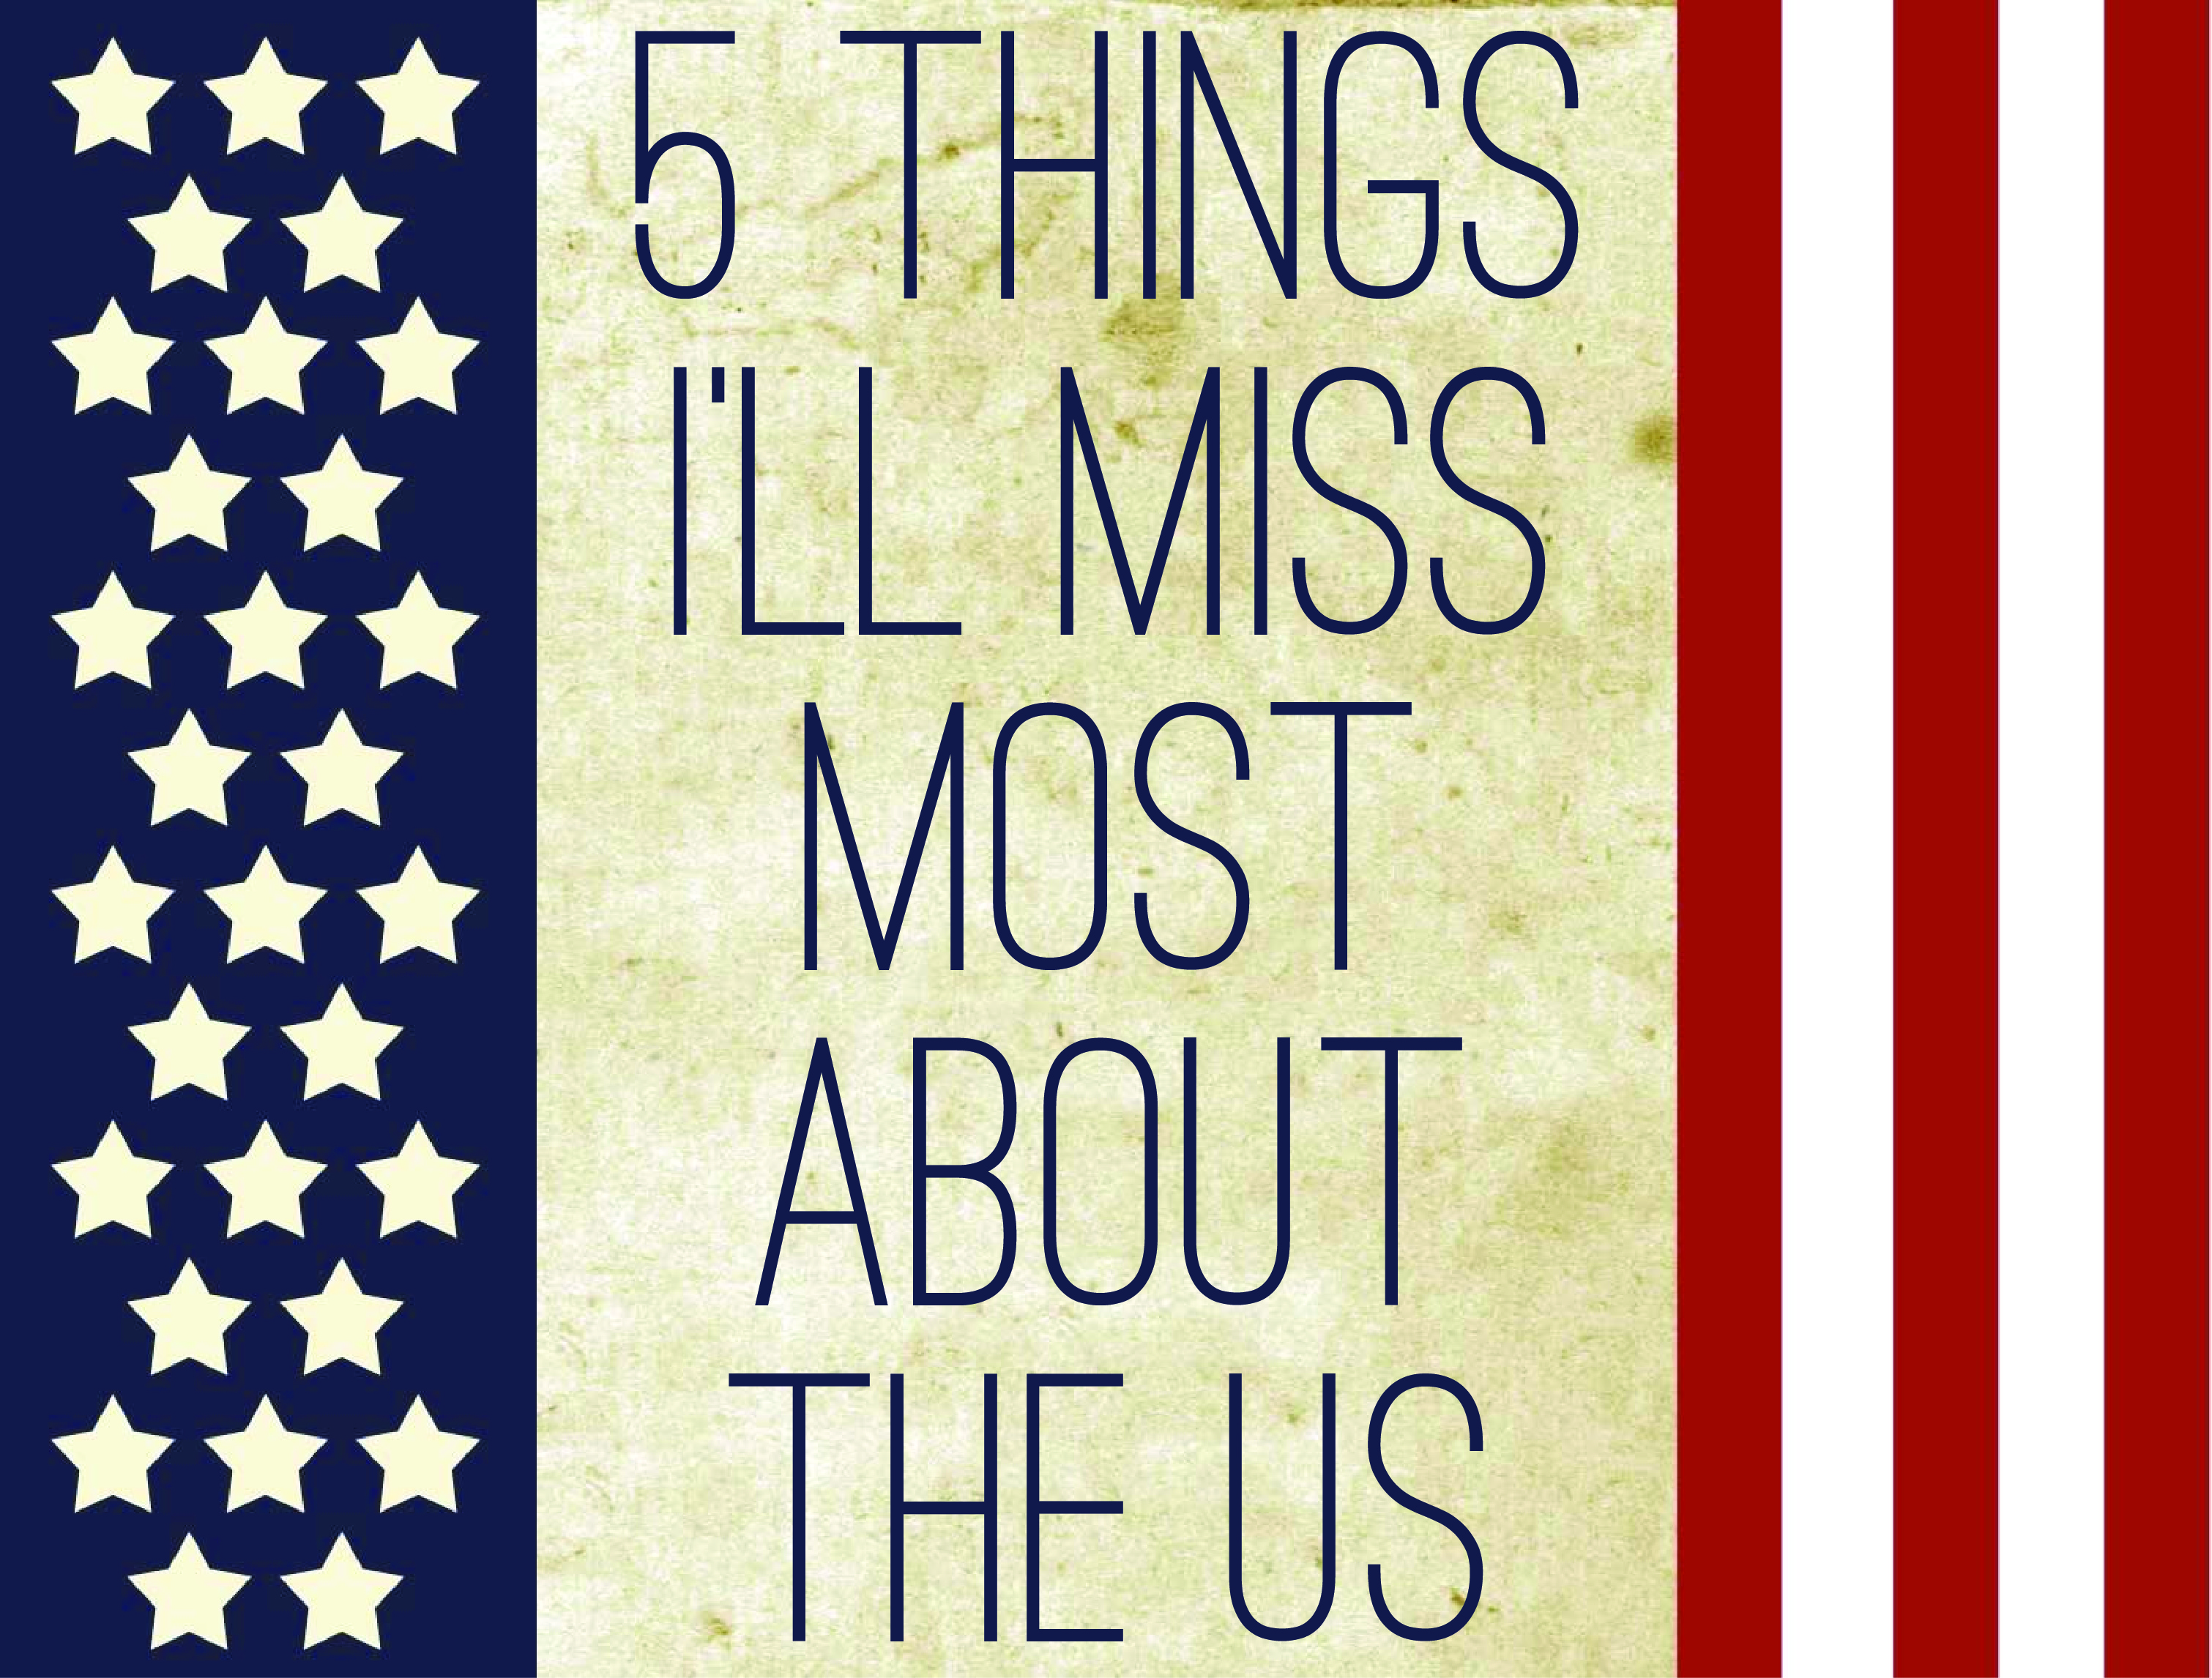 5 Things I'l Miss Most about the US